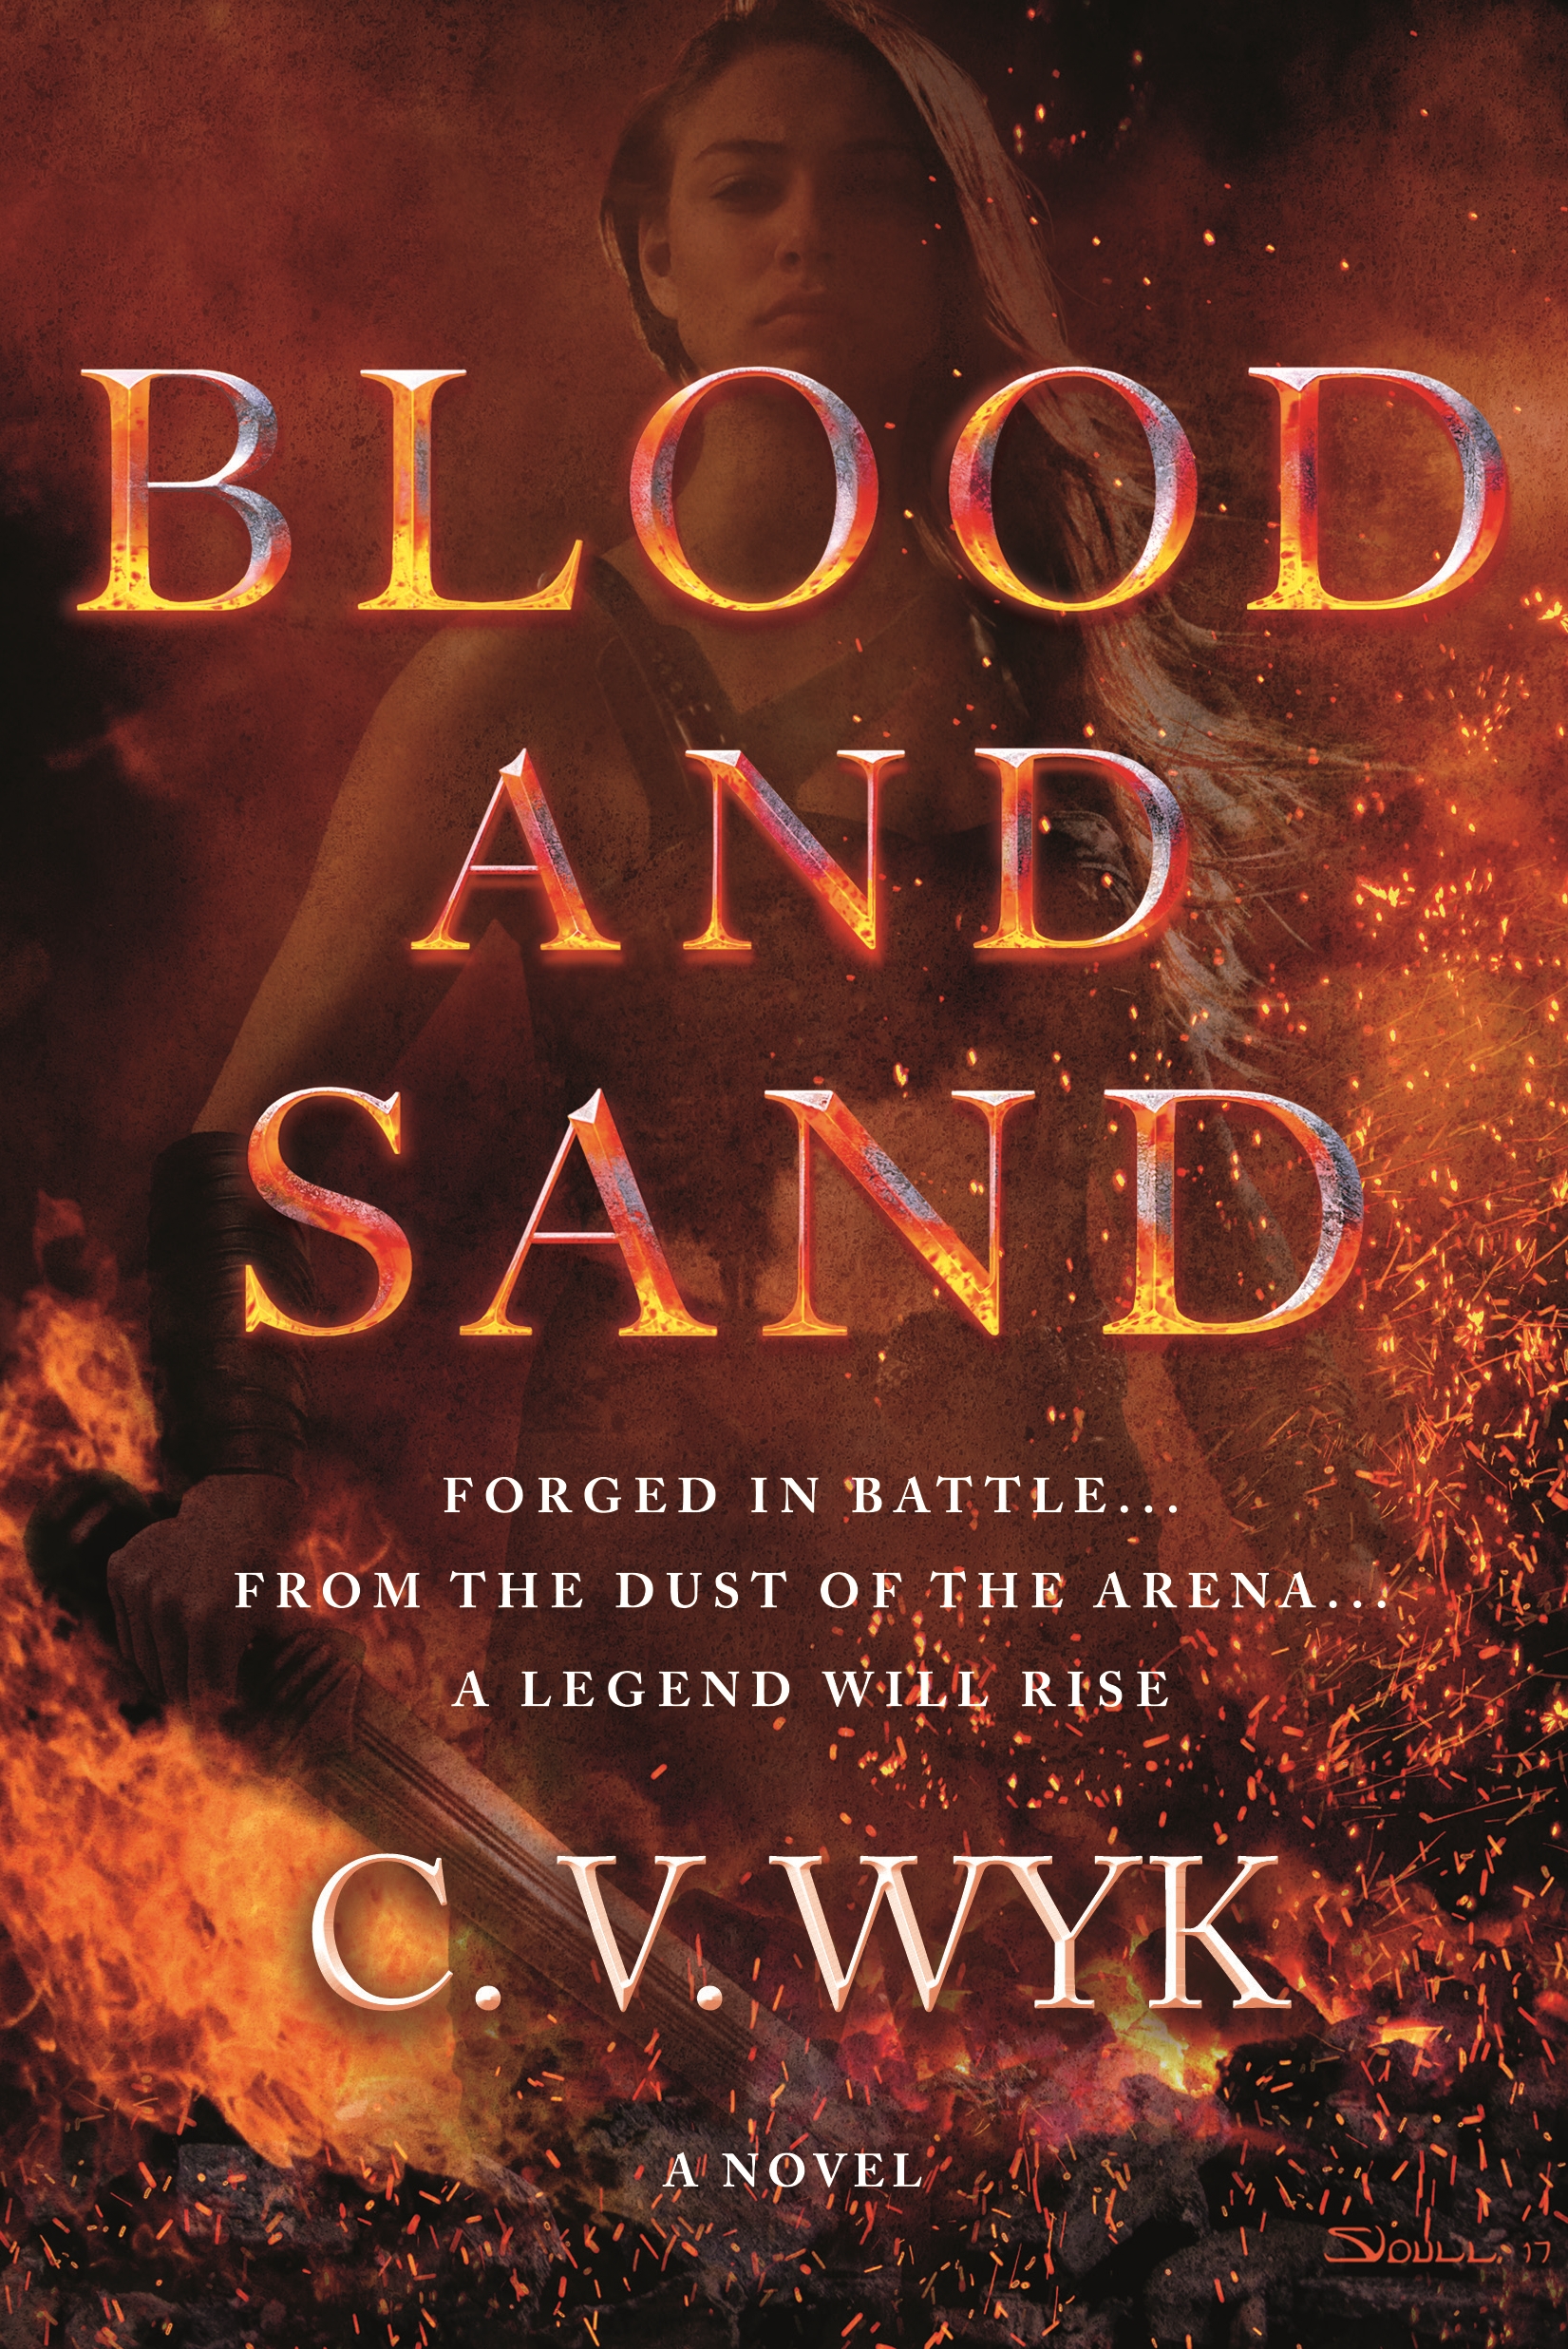 Blood and Sand : A Novel by C. V. Wyk